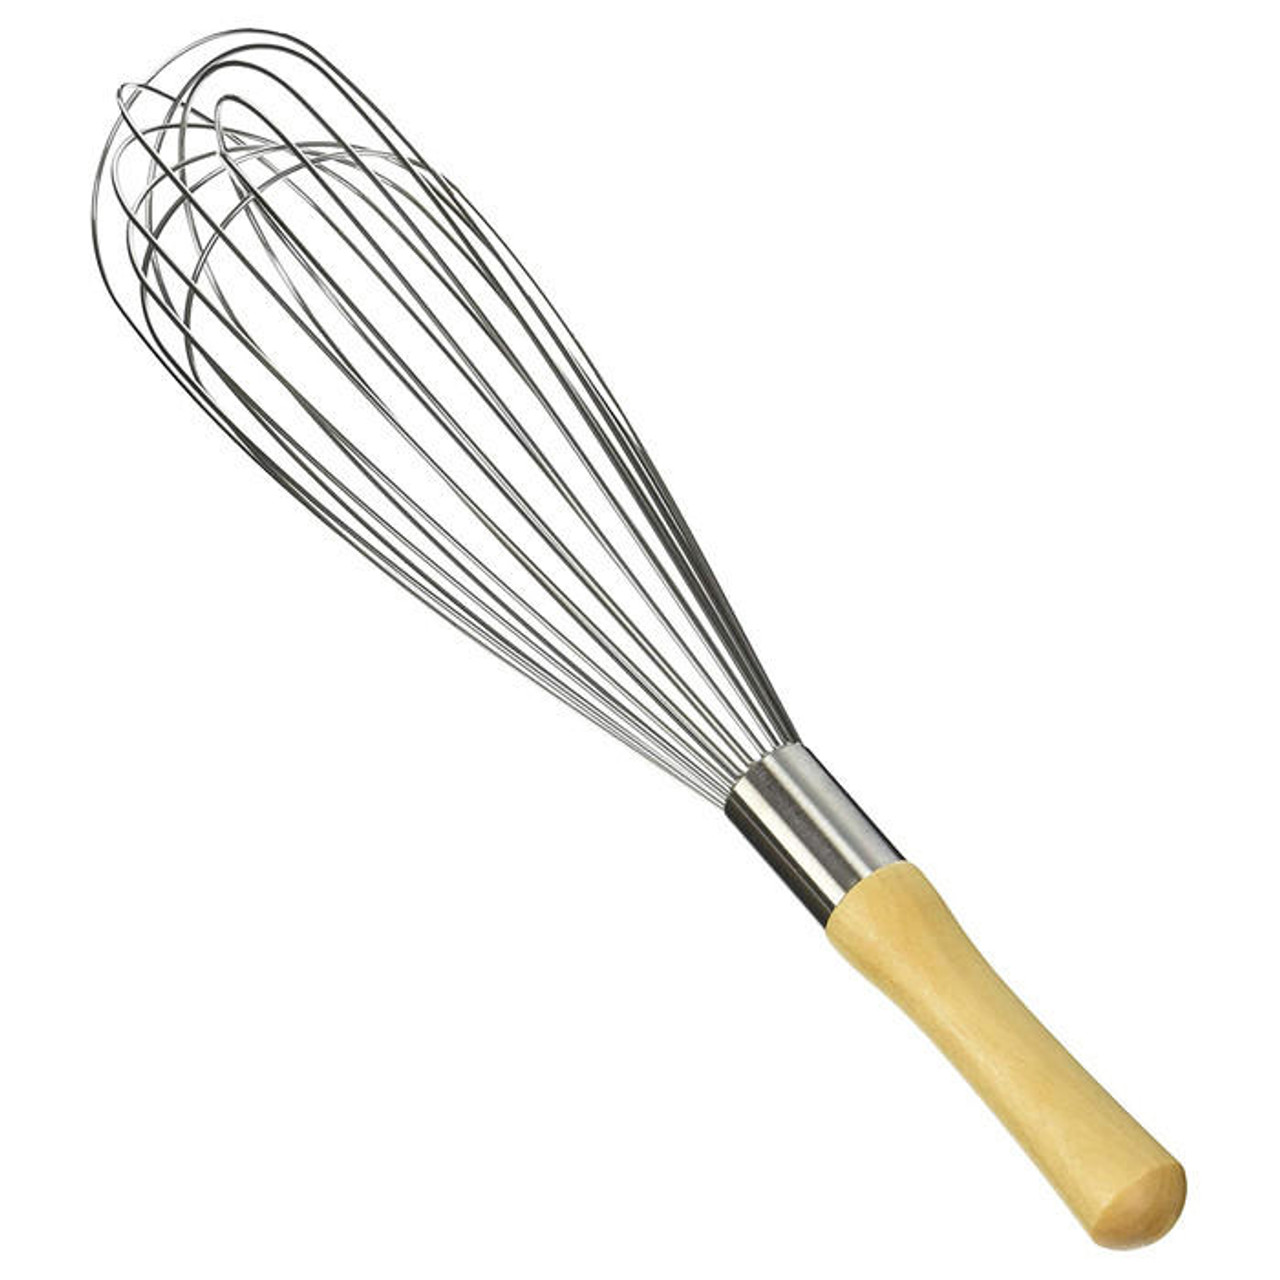 Sauce Whisk 14-inch with Wood Handle